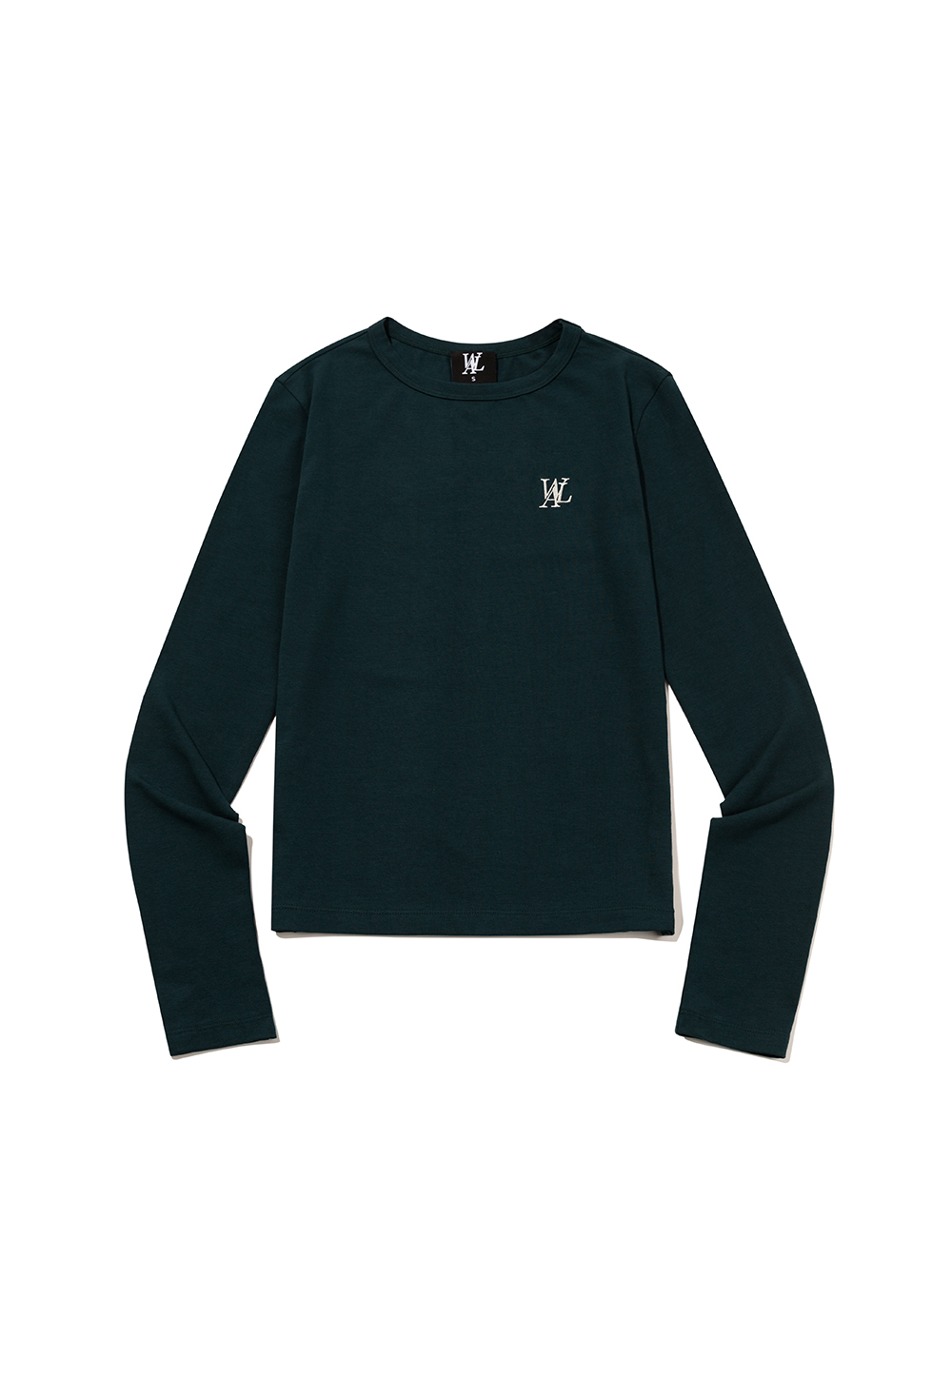 Signature fitted silky long sleeve - DARK GREEN